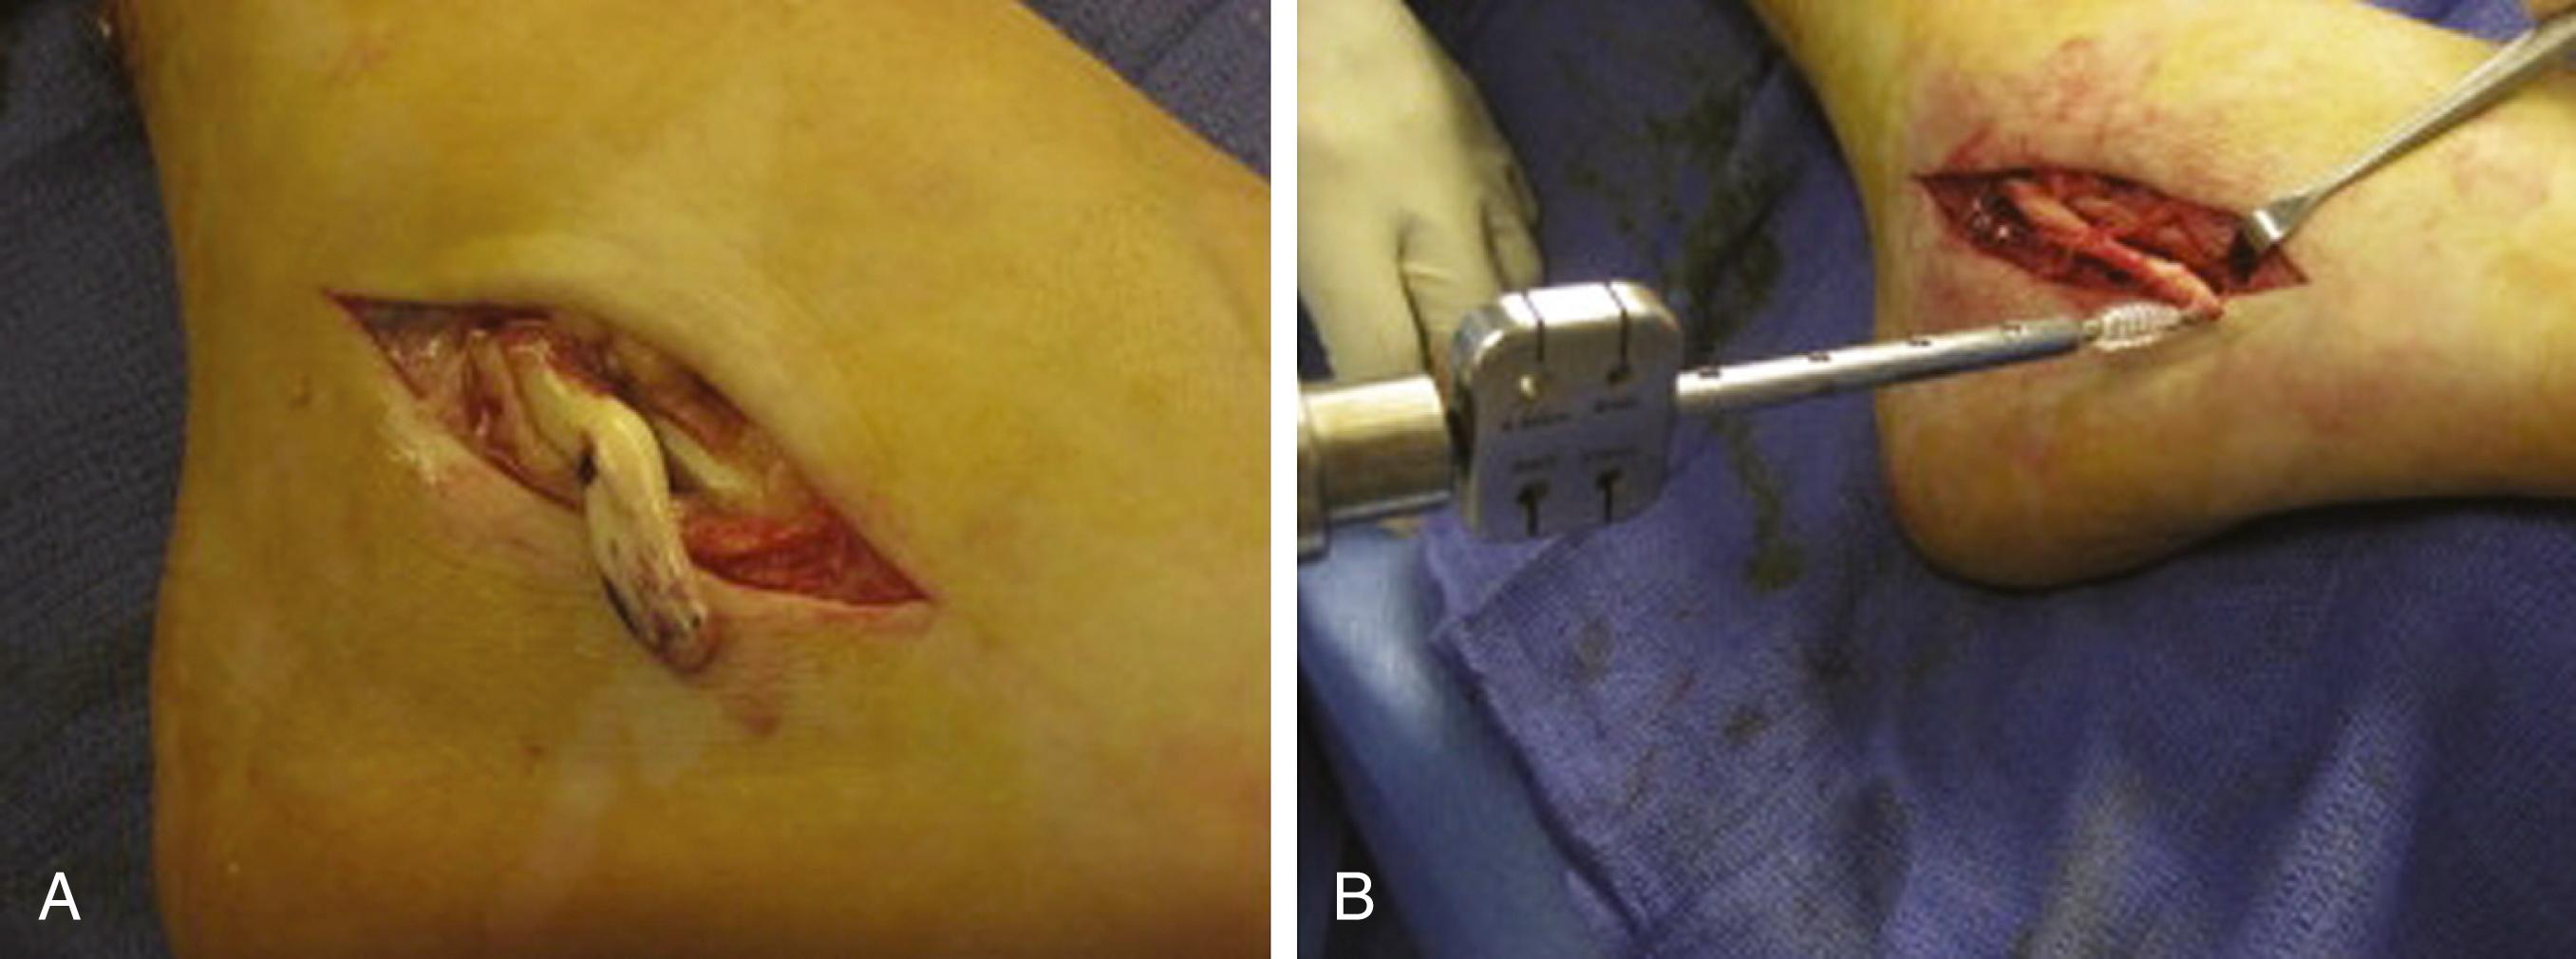 FIG. 188.2, A and B, Photos show complete rupture of the peroneus longus at the cuboid tunnel, which required insertion into the cuboid using an interference screw.